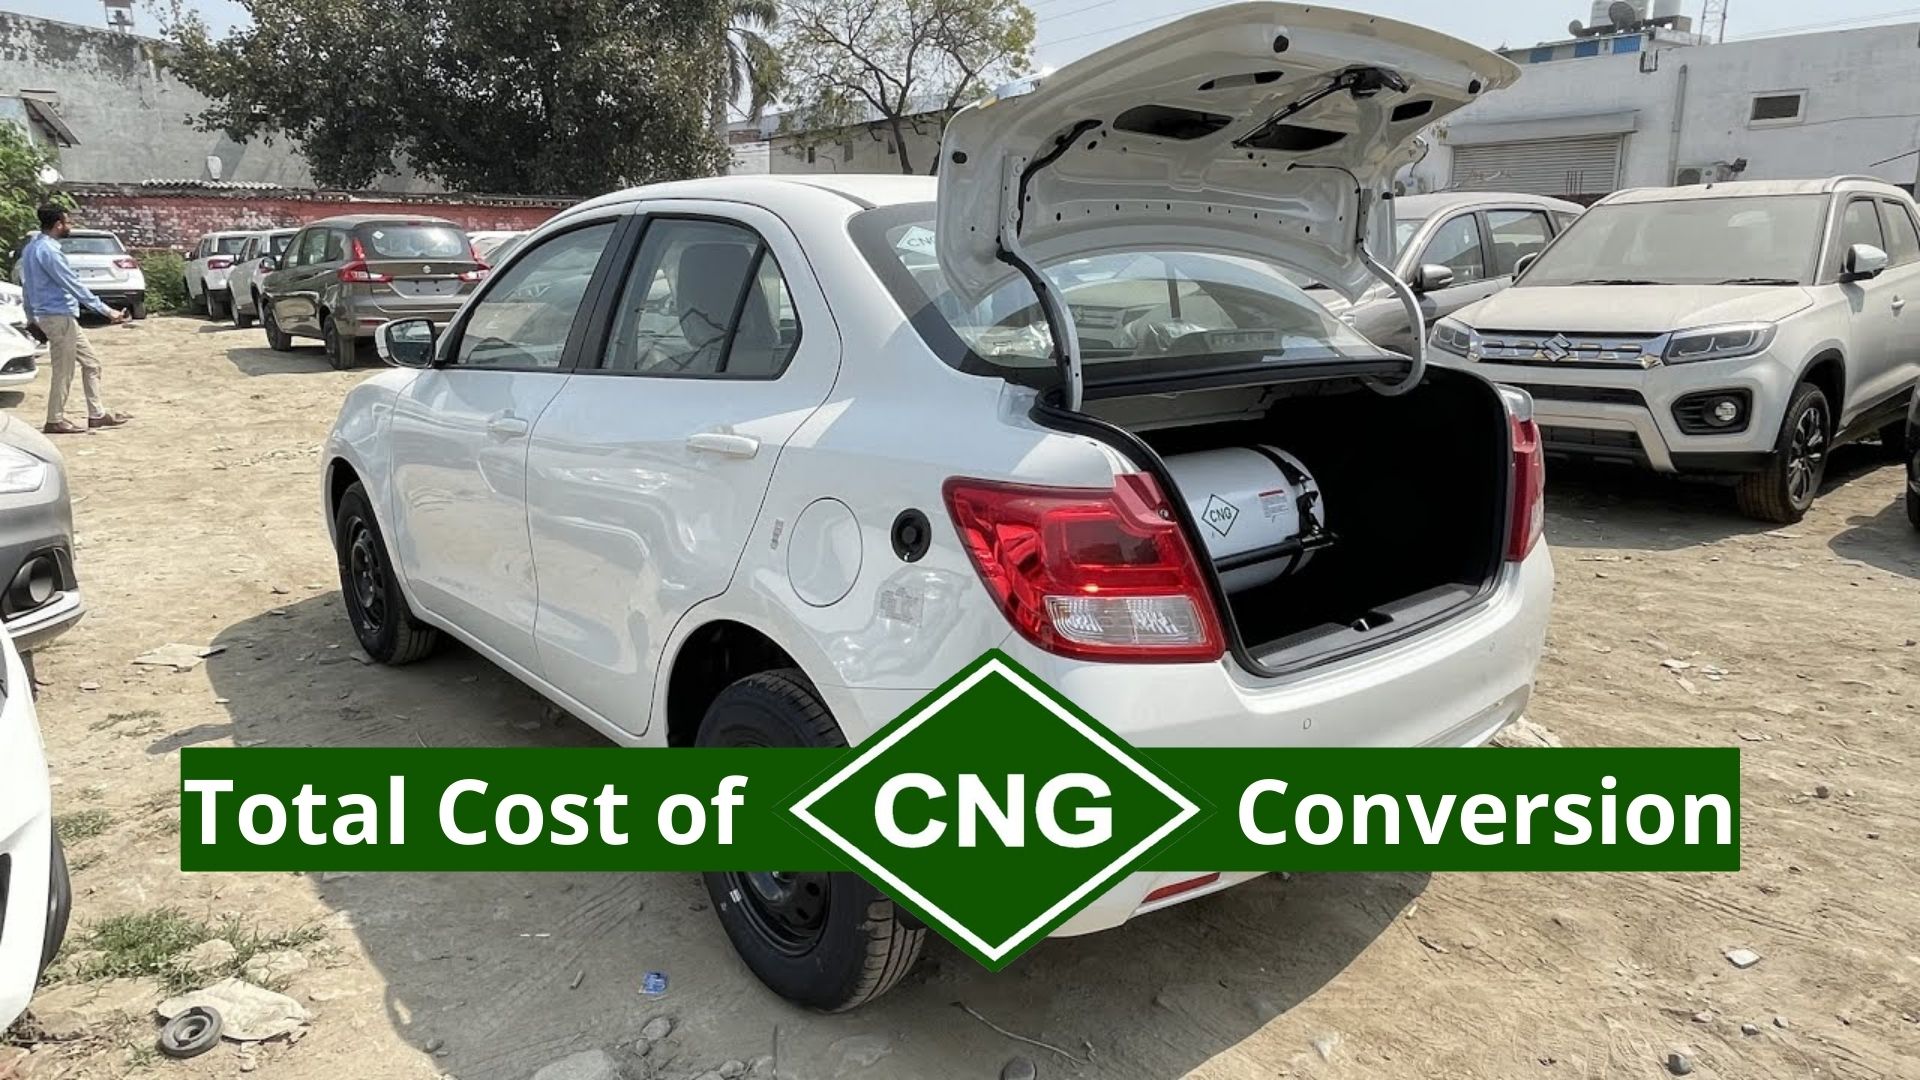 https://carandbike24.com/total-cost-to-convert-from-petrol-car-to-cng-car/